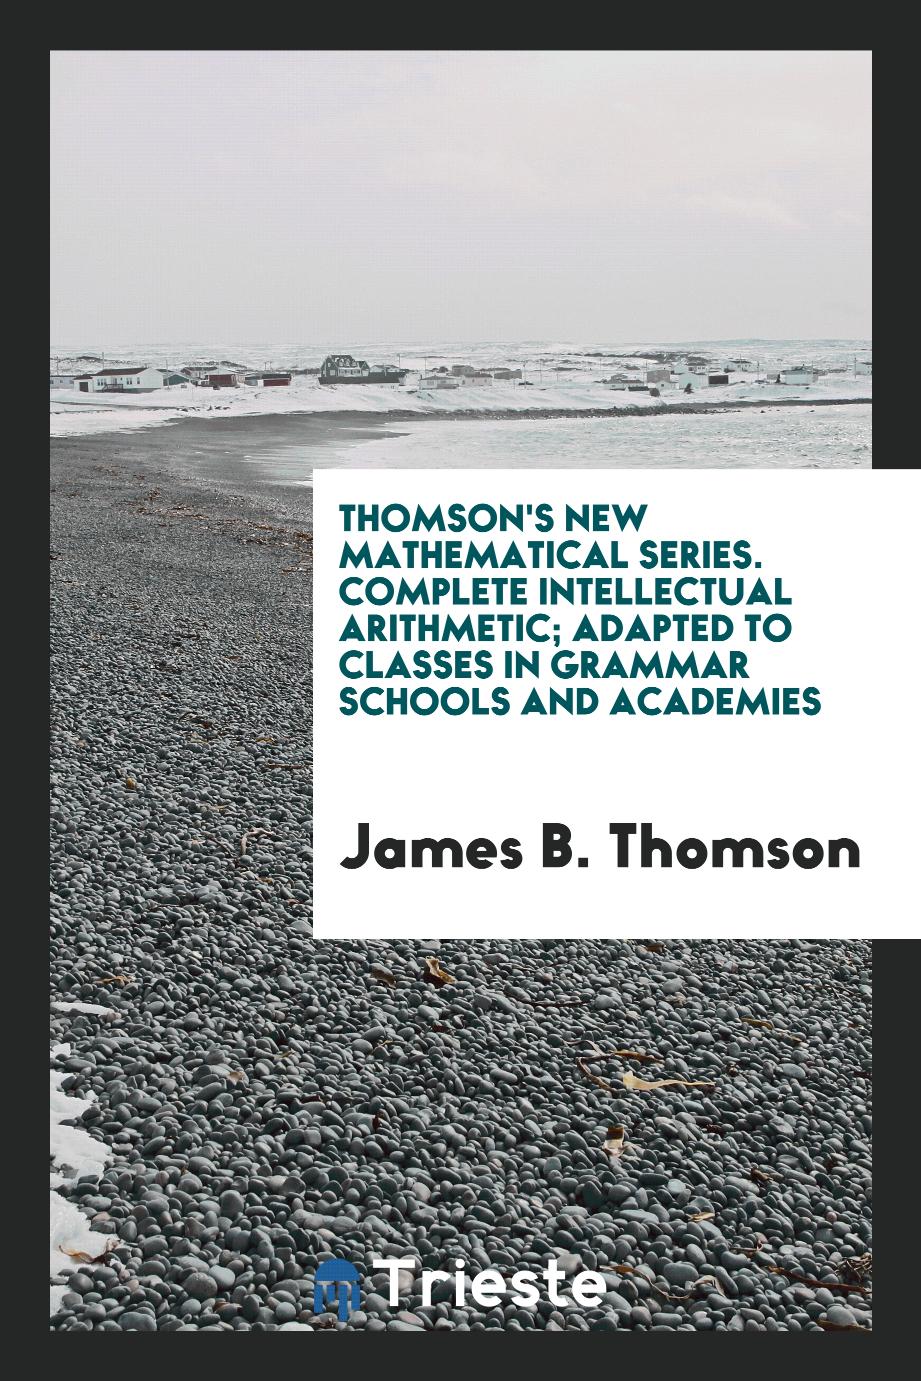 Thomson's New Mathematical Series. Complete Intellectual Arithmetic; Adapted to Classes in Grammar Schools and Academies